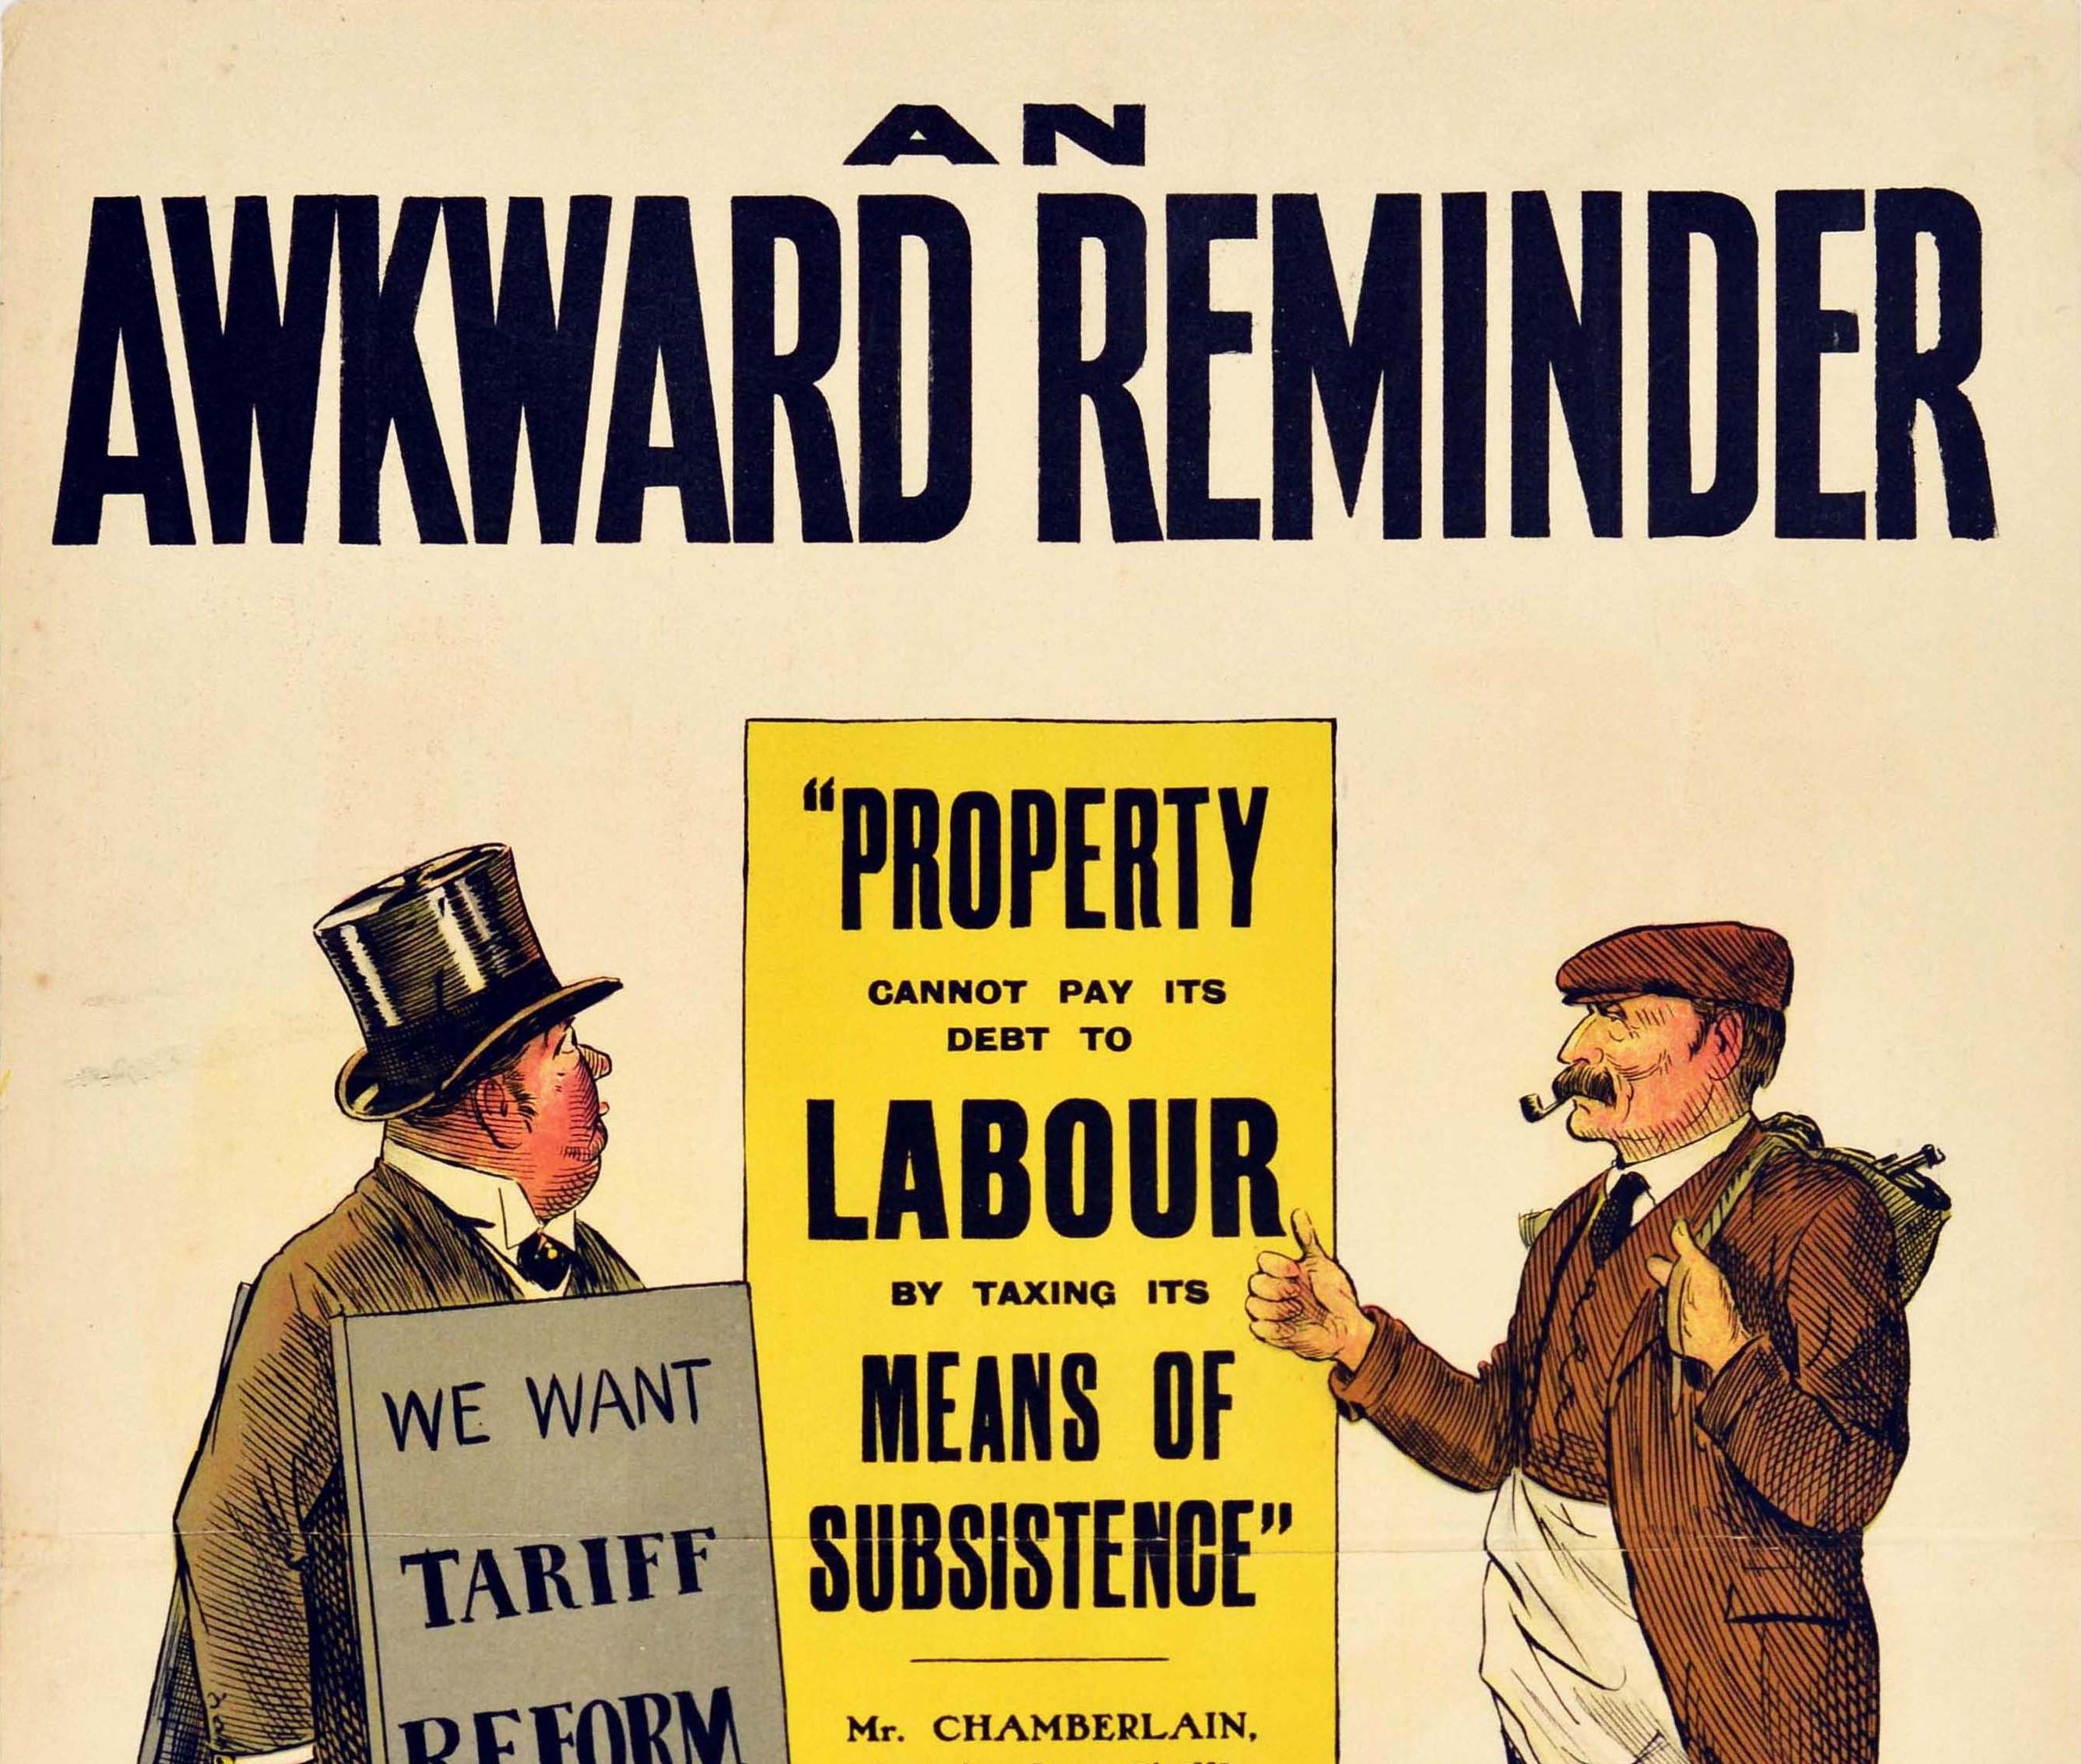 Original antique political election propaganda poster issued by the Liberal Party - An Awkward Reminder - featuring an illustration of two men on a street, one wearing a suit and top hat with a sandwich board sign marked We Want Tariff Reform and